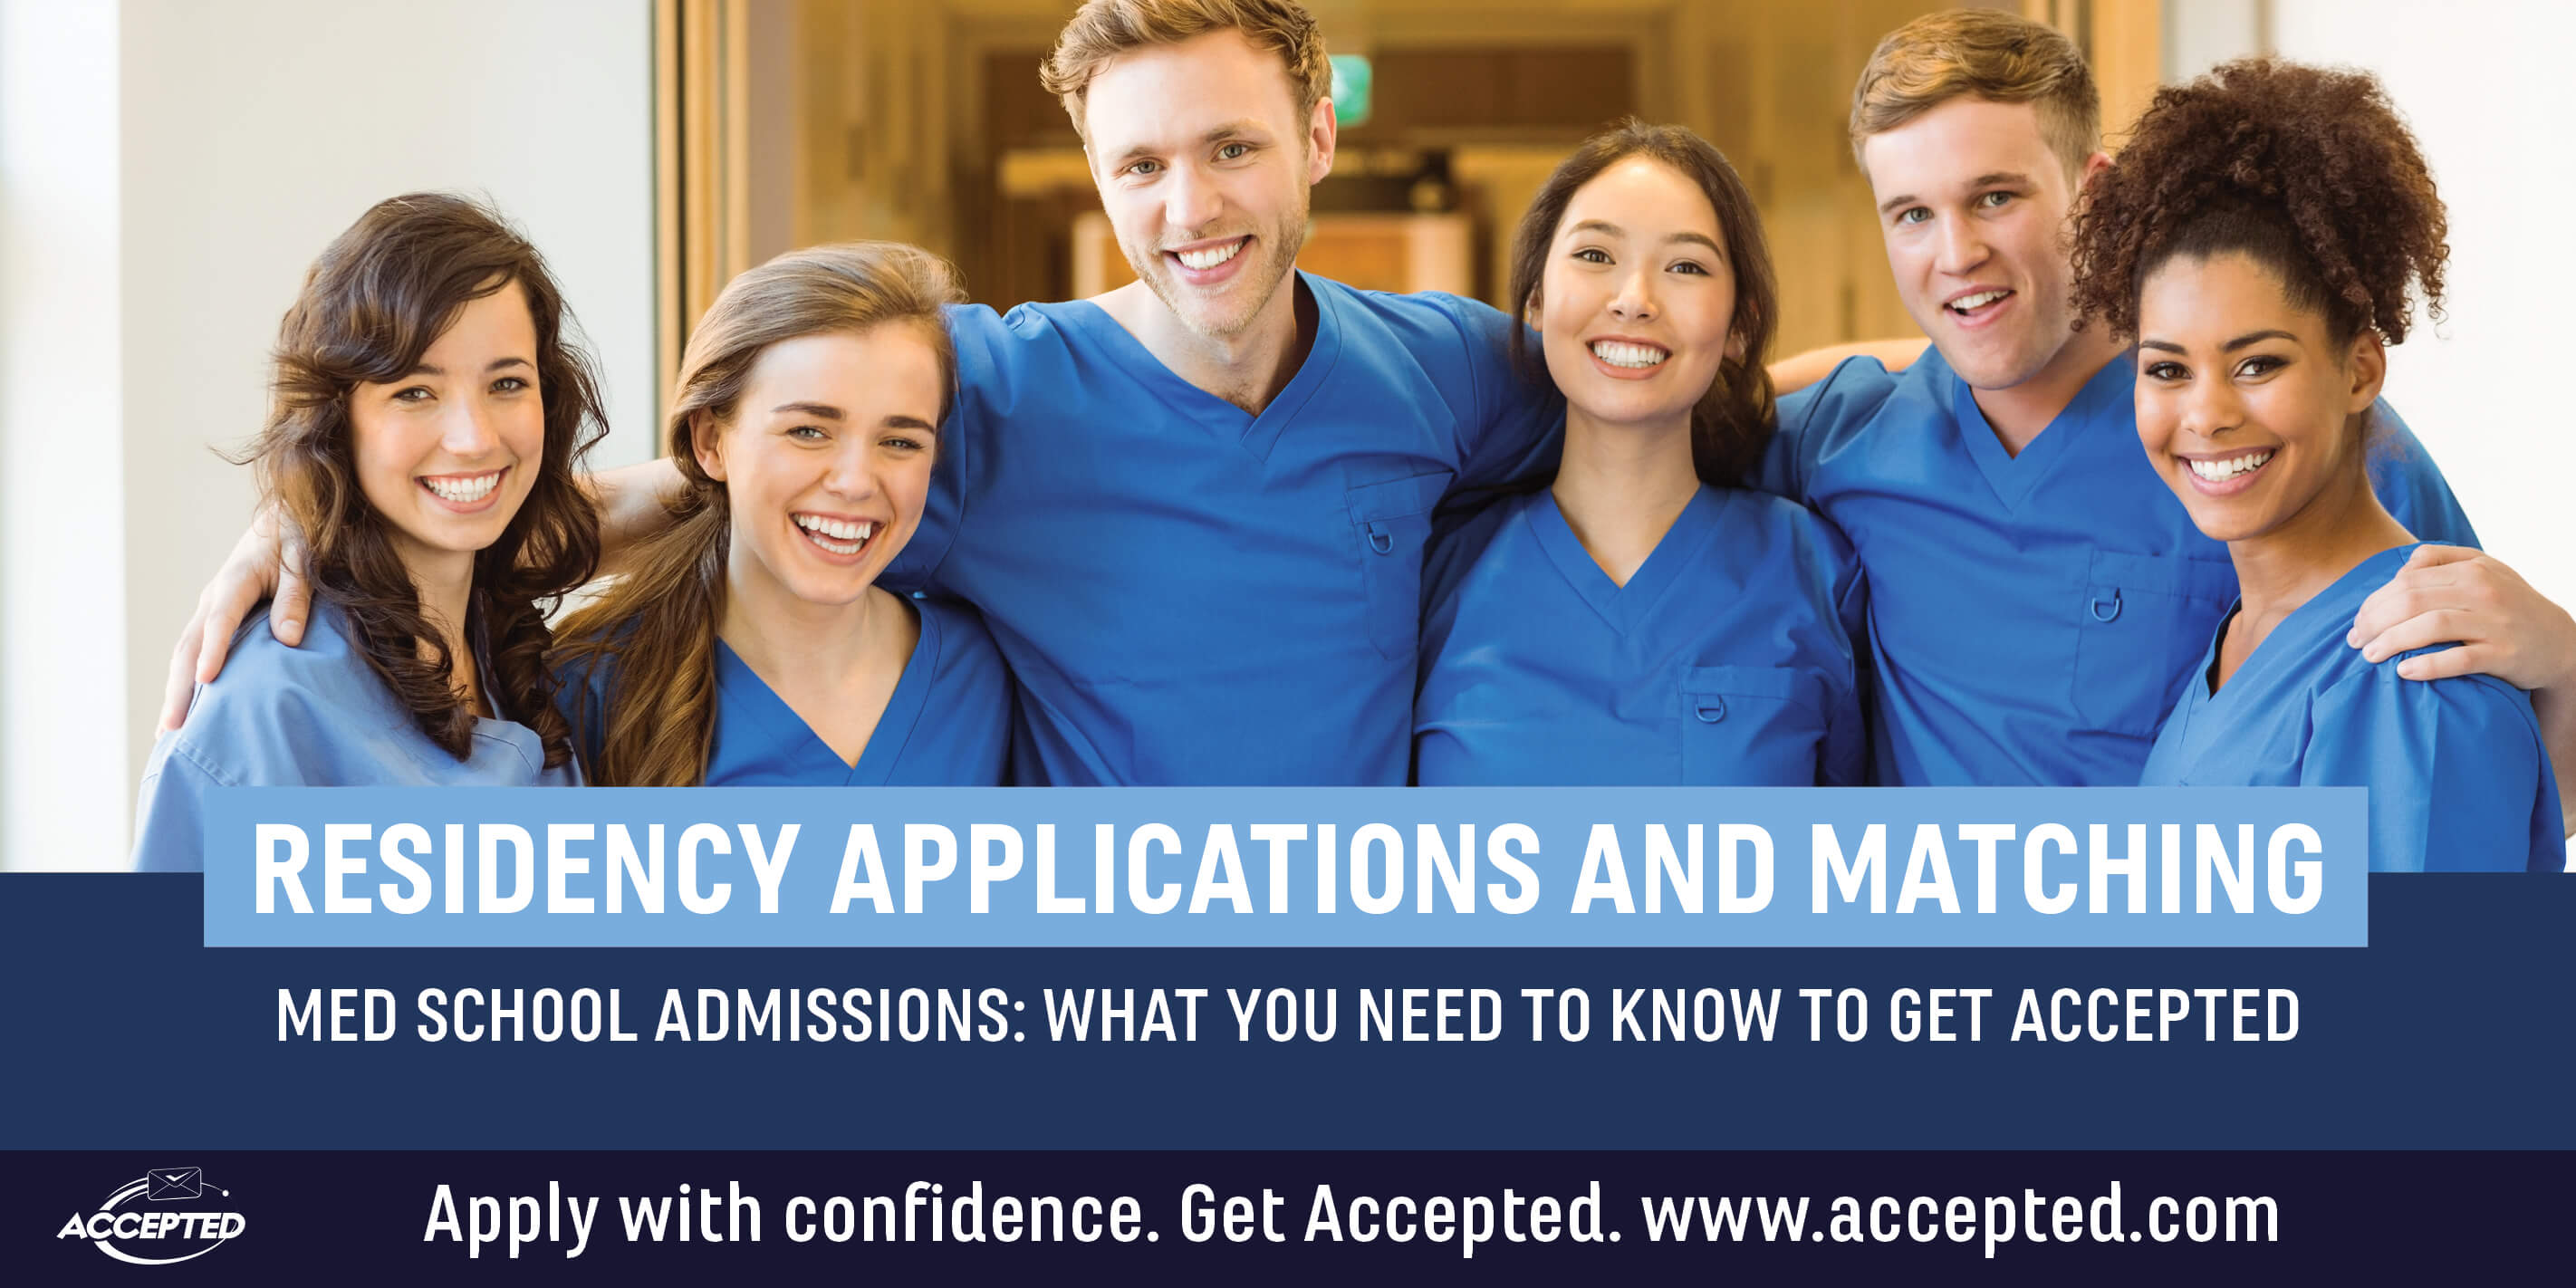 Accepted All You Need to Know About Residency Applications and Matching